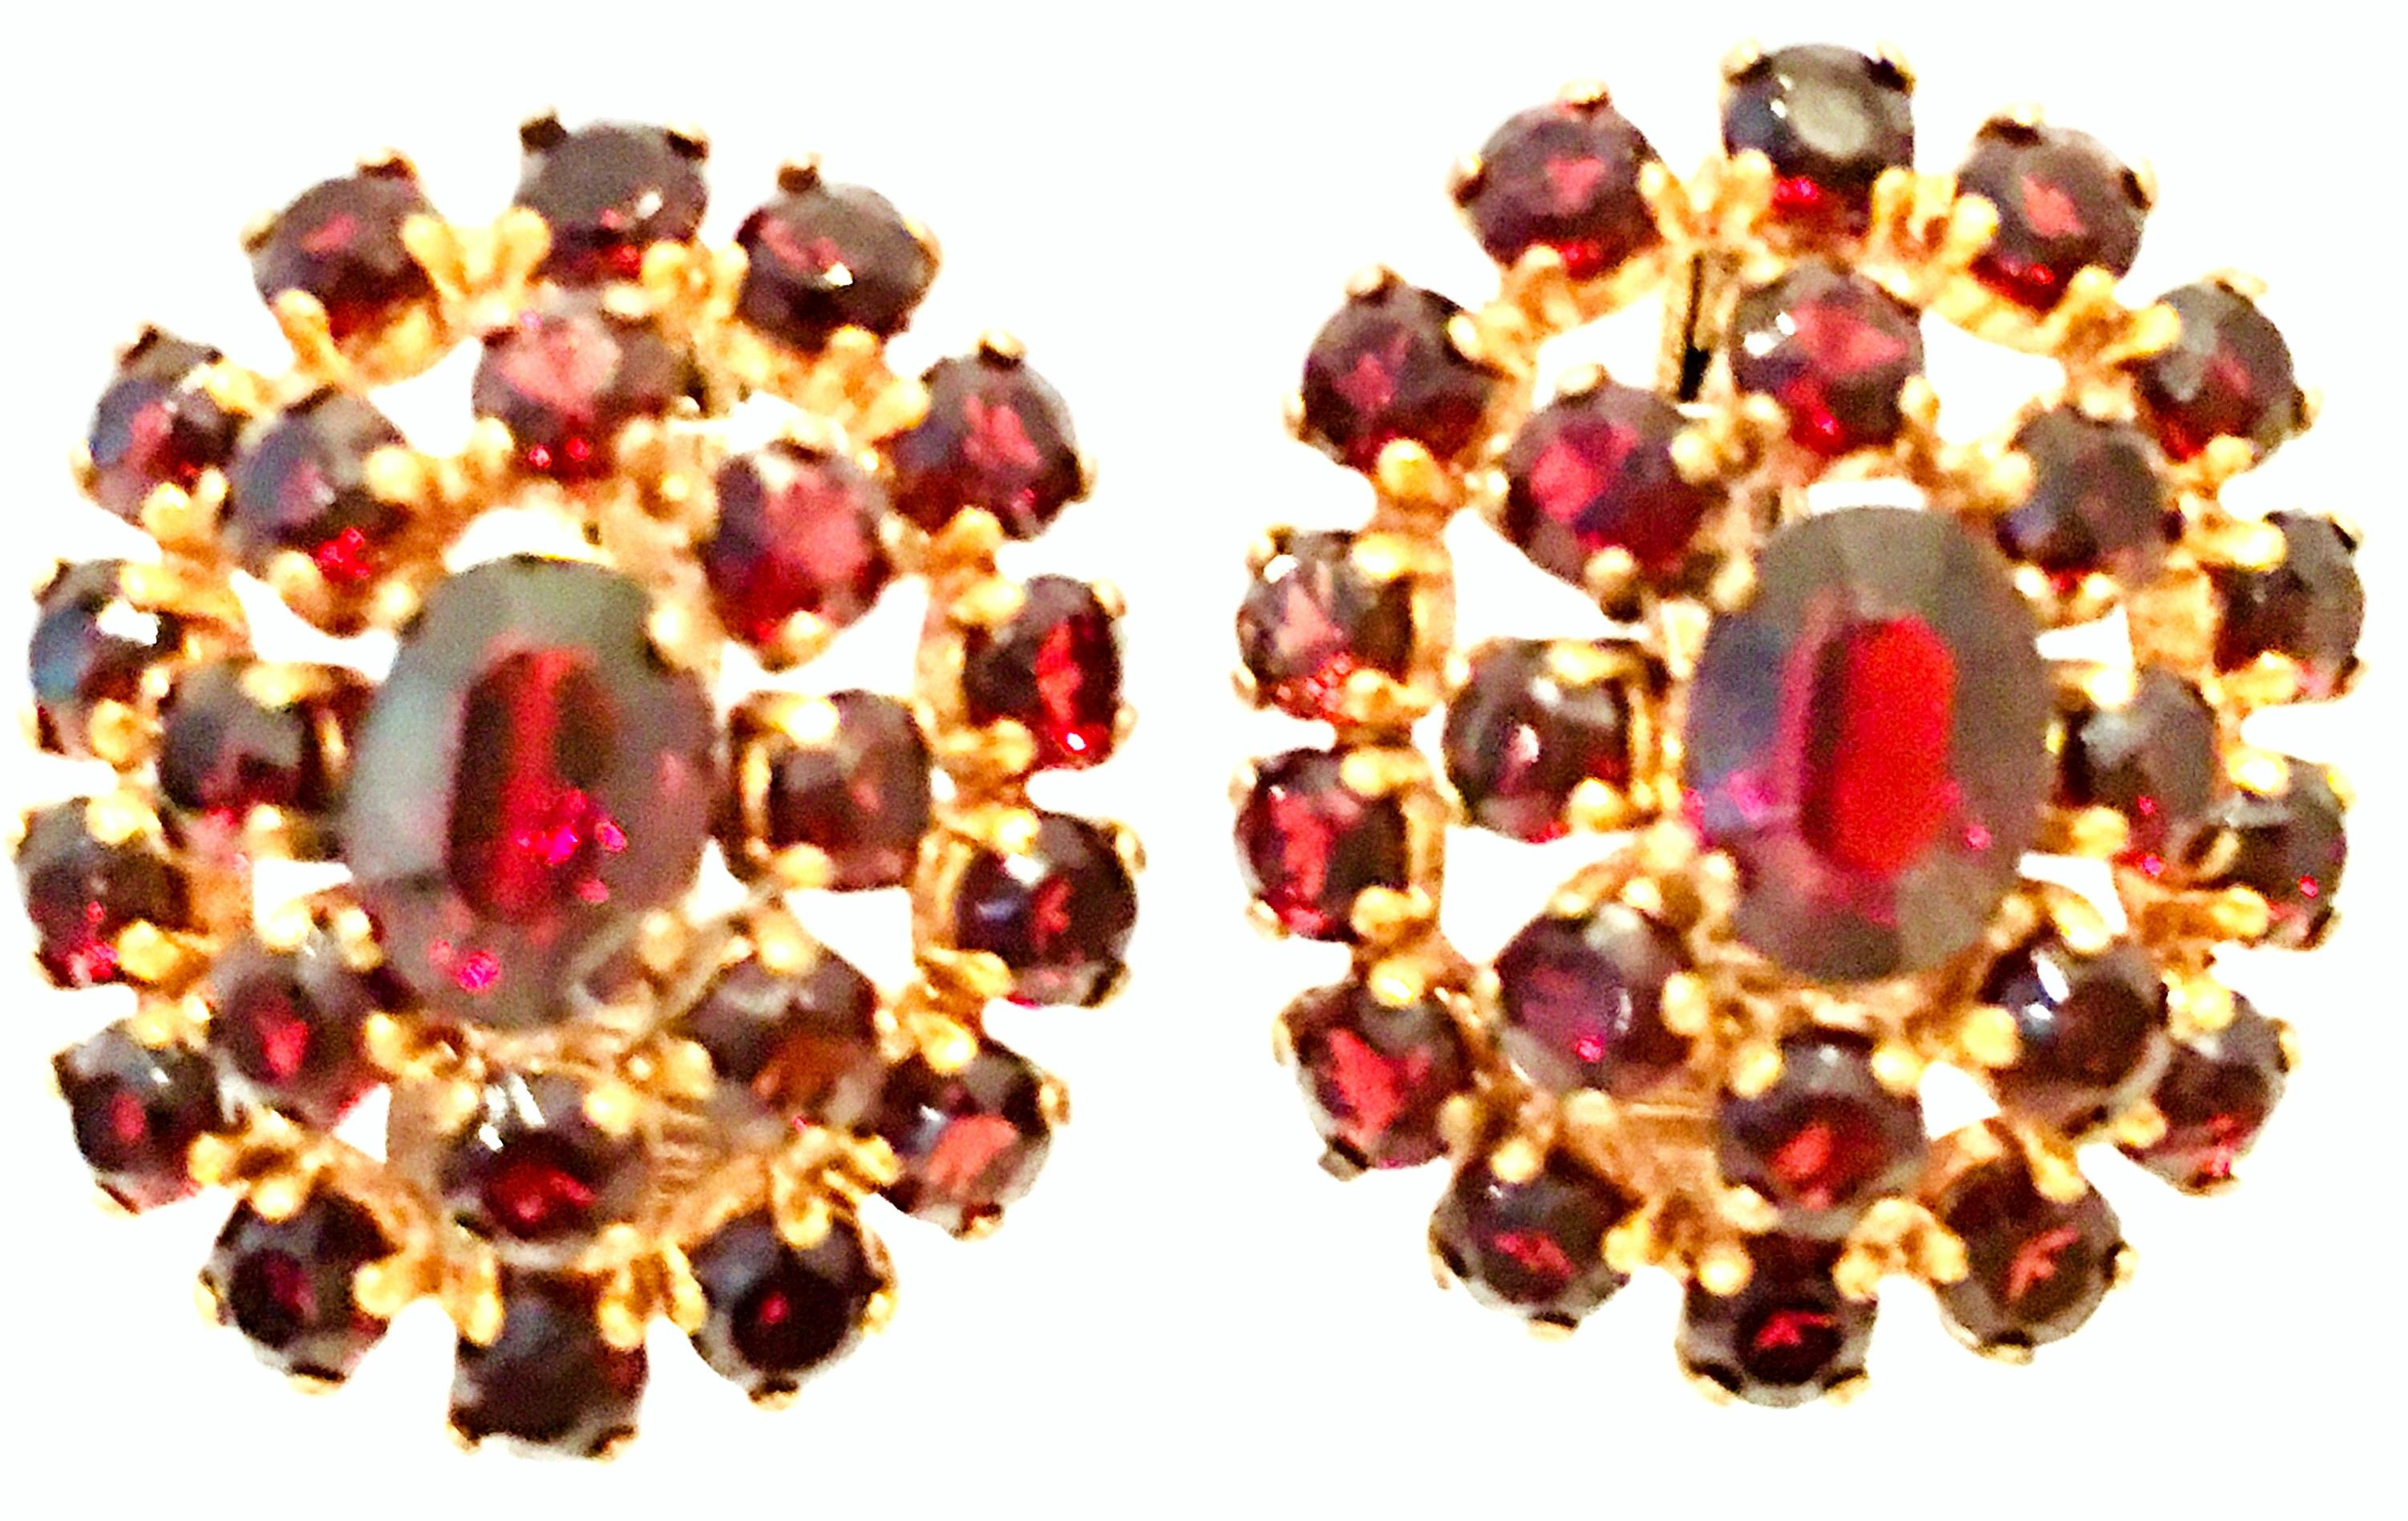 Mid-20th Century 12K Gold Plate & Authentic Brilliant Natural Rose Cut Garnet Pair Of Clip Style Earrings.
Total weight, 6 grams.